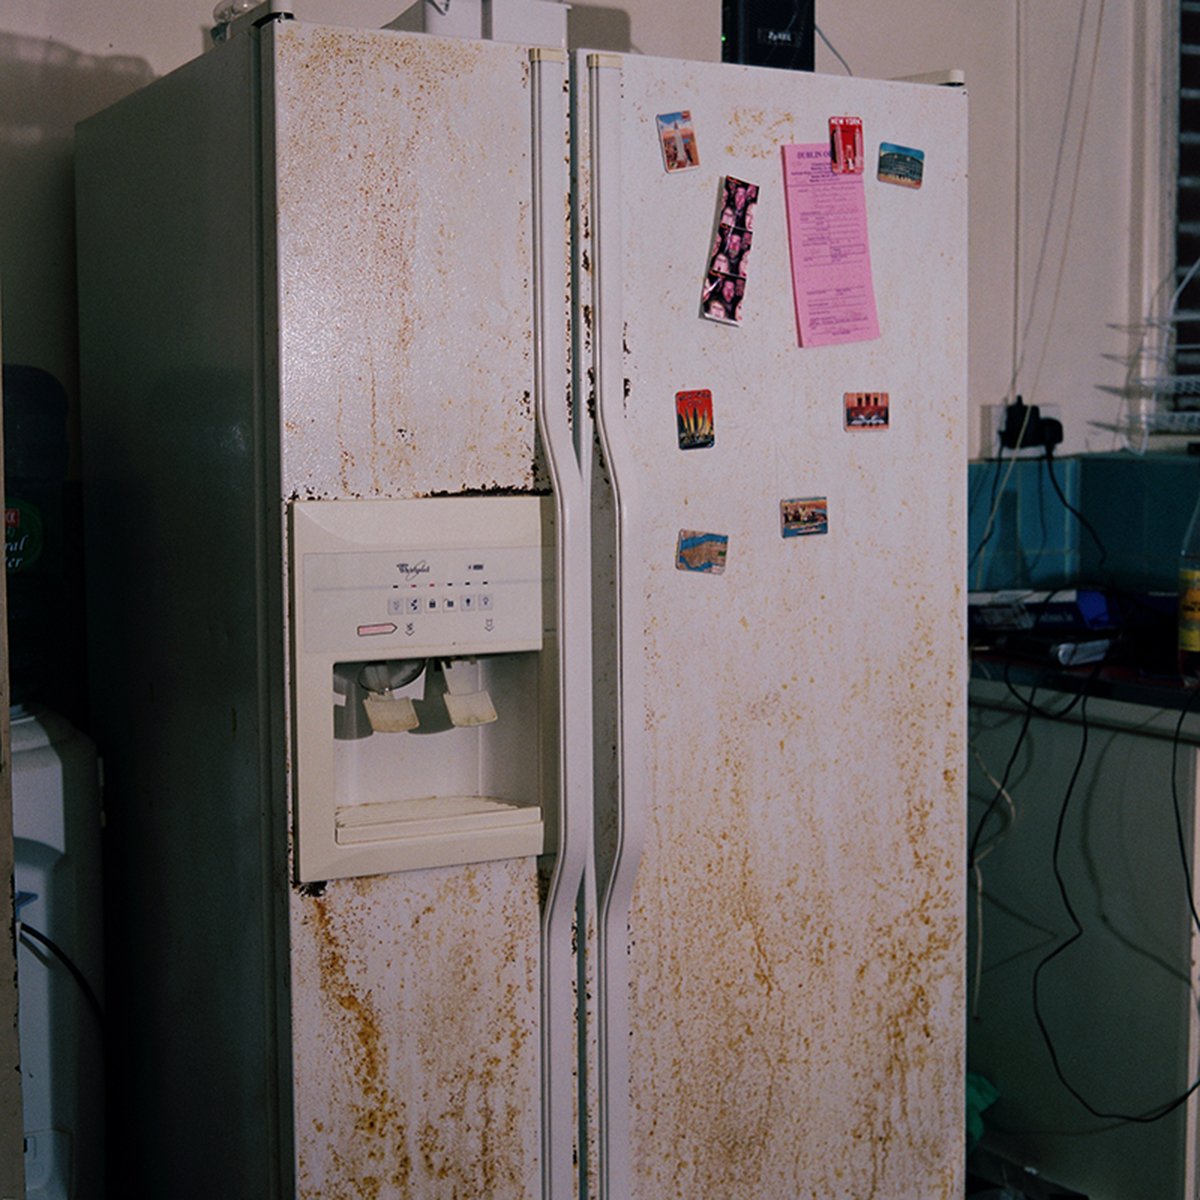 'The Fridge' from the series 'Church Road' © Emma McGuire